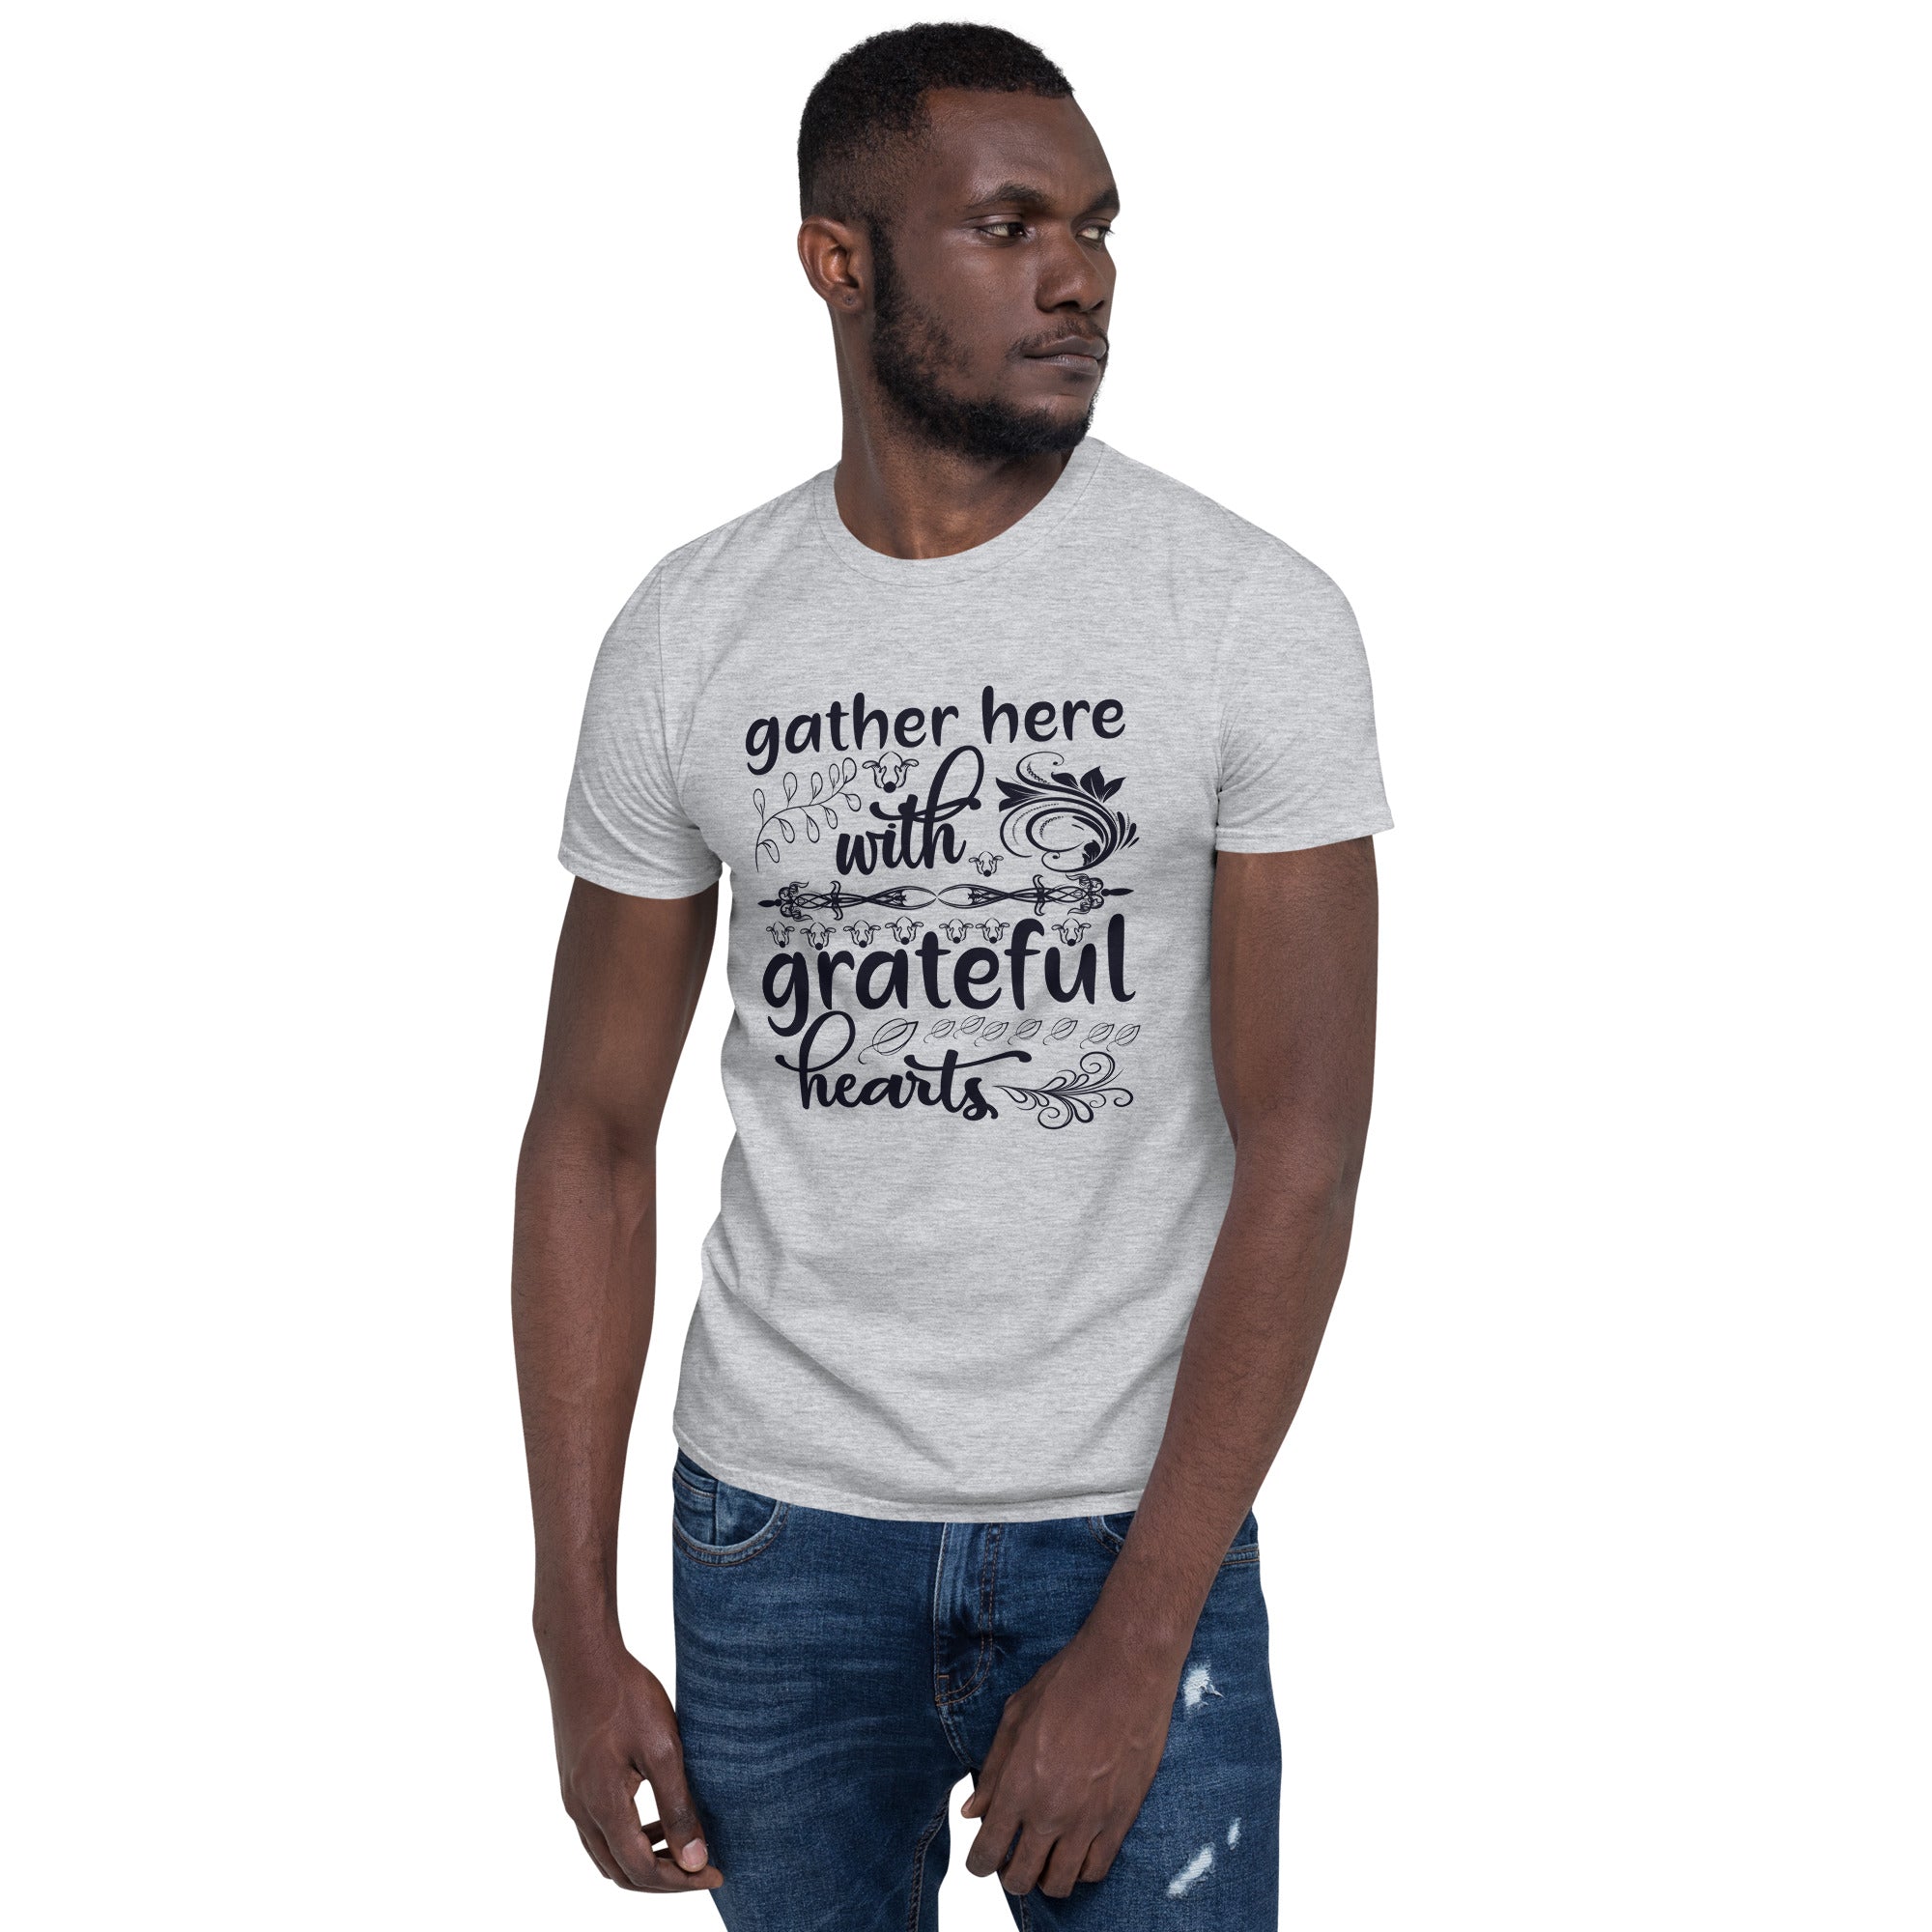 Gather Here With Grateful Hearts - Short-Sleeve Unisex T-Shirt